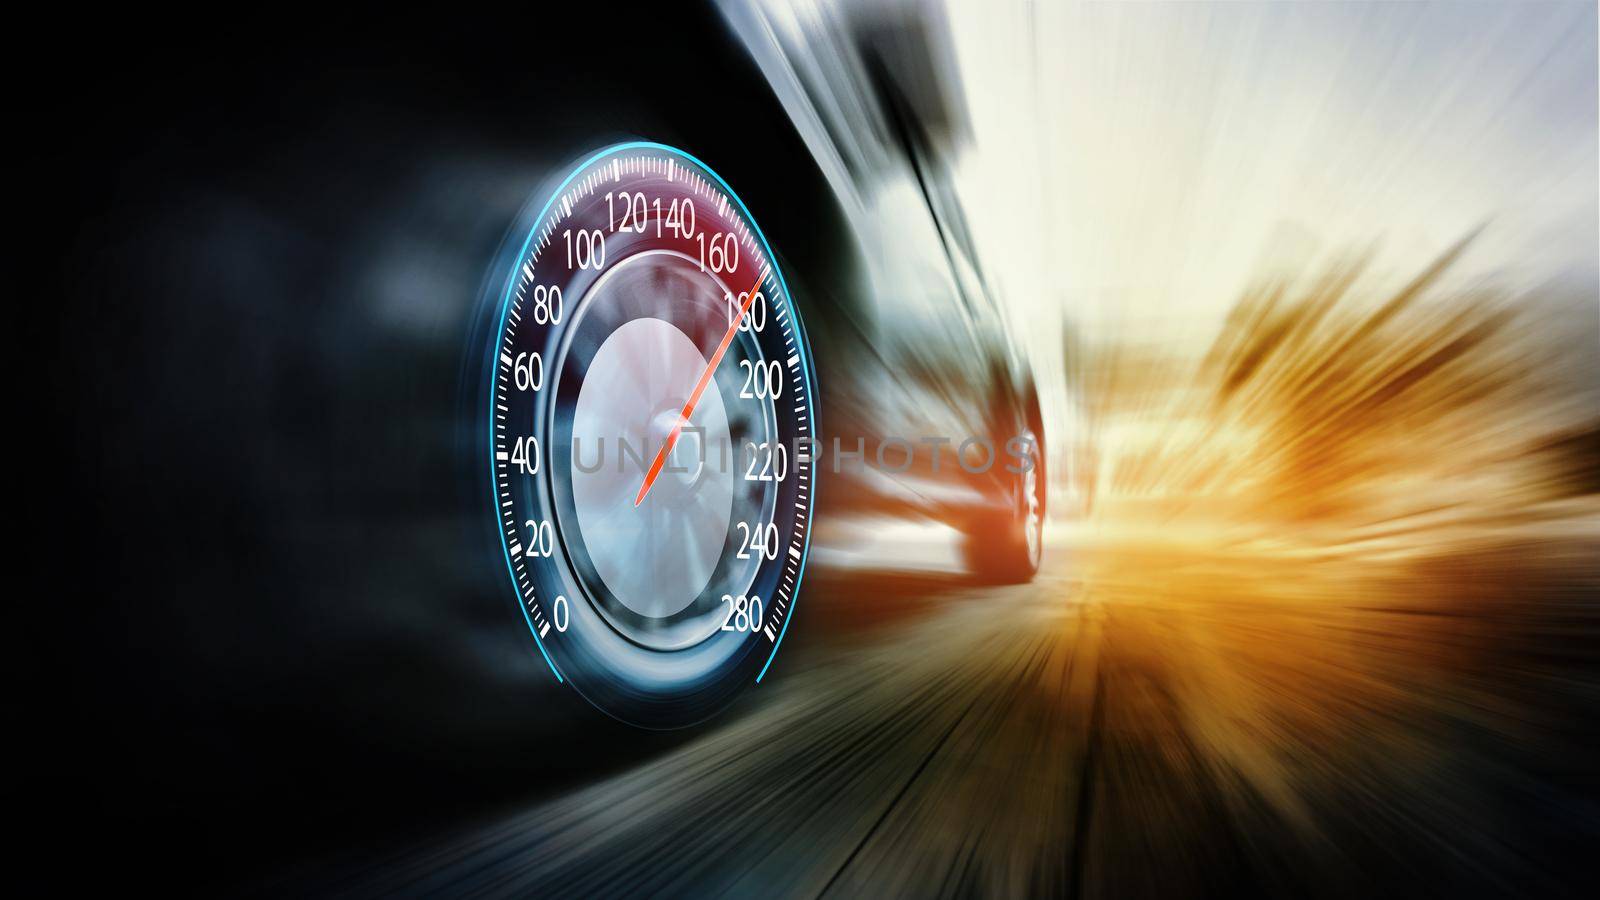 Speeding car with speedometer by Wasant